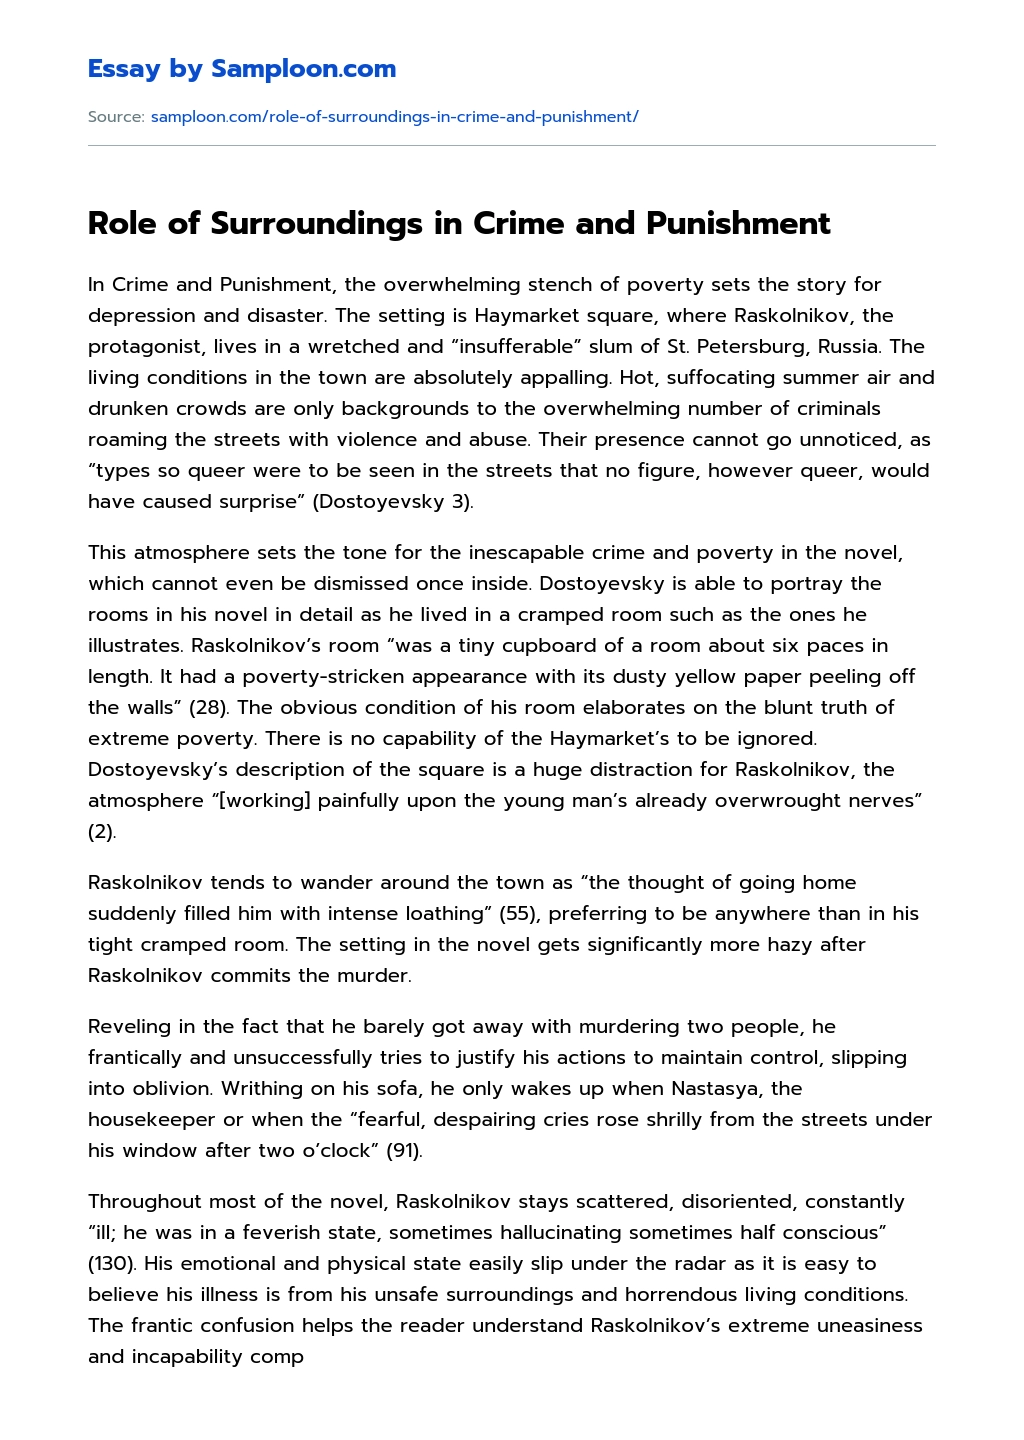 Role of Surroundings in Crime and Punishment essay